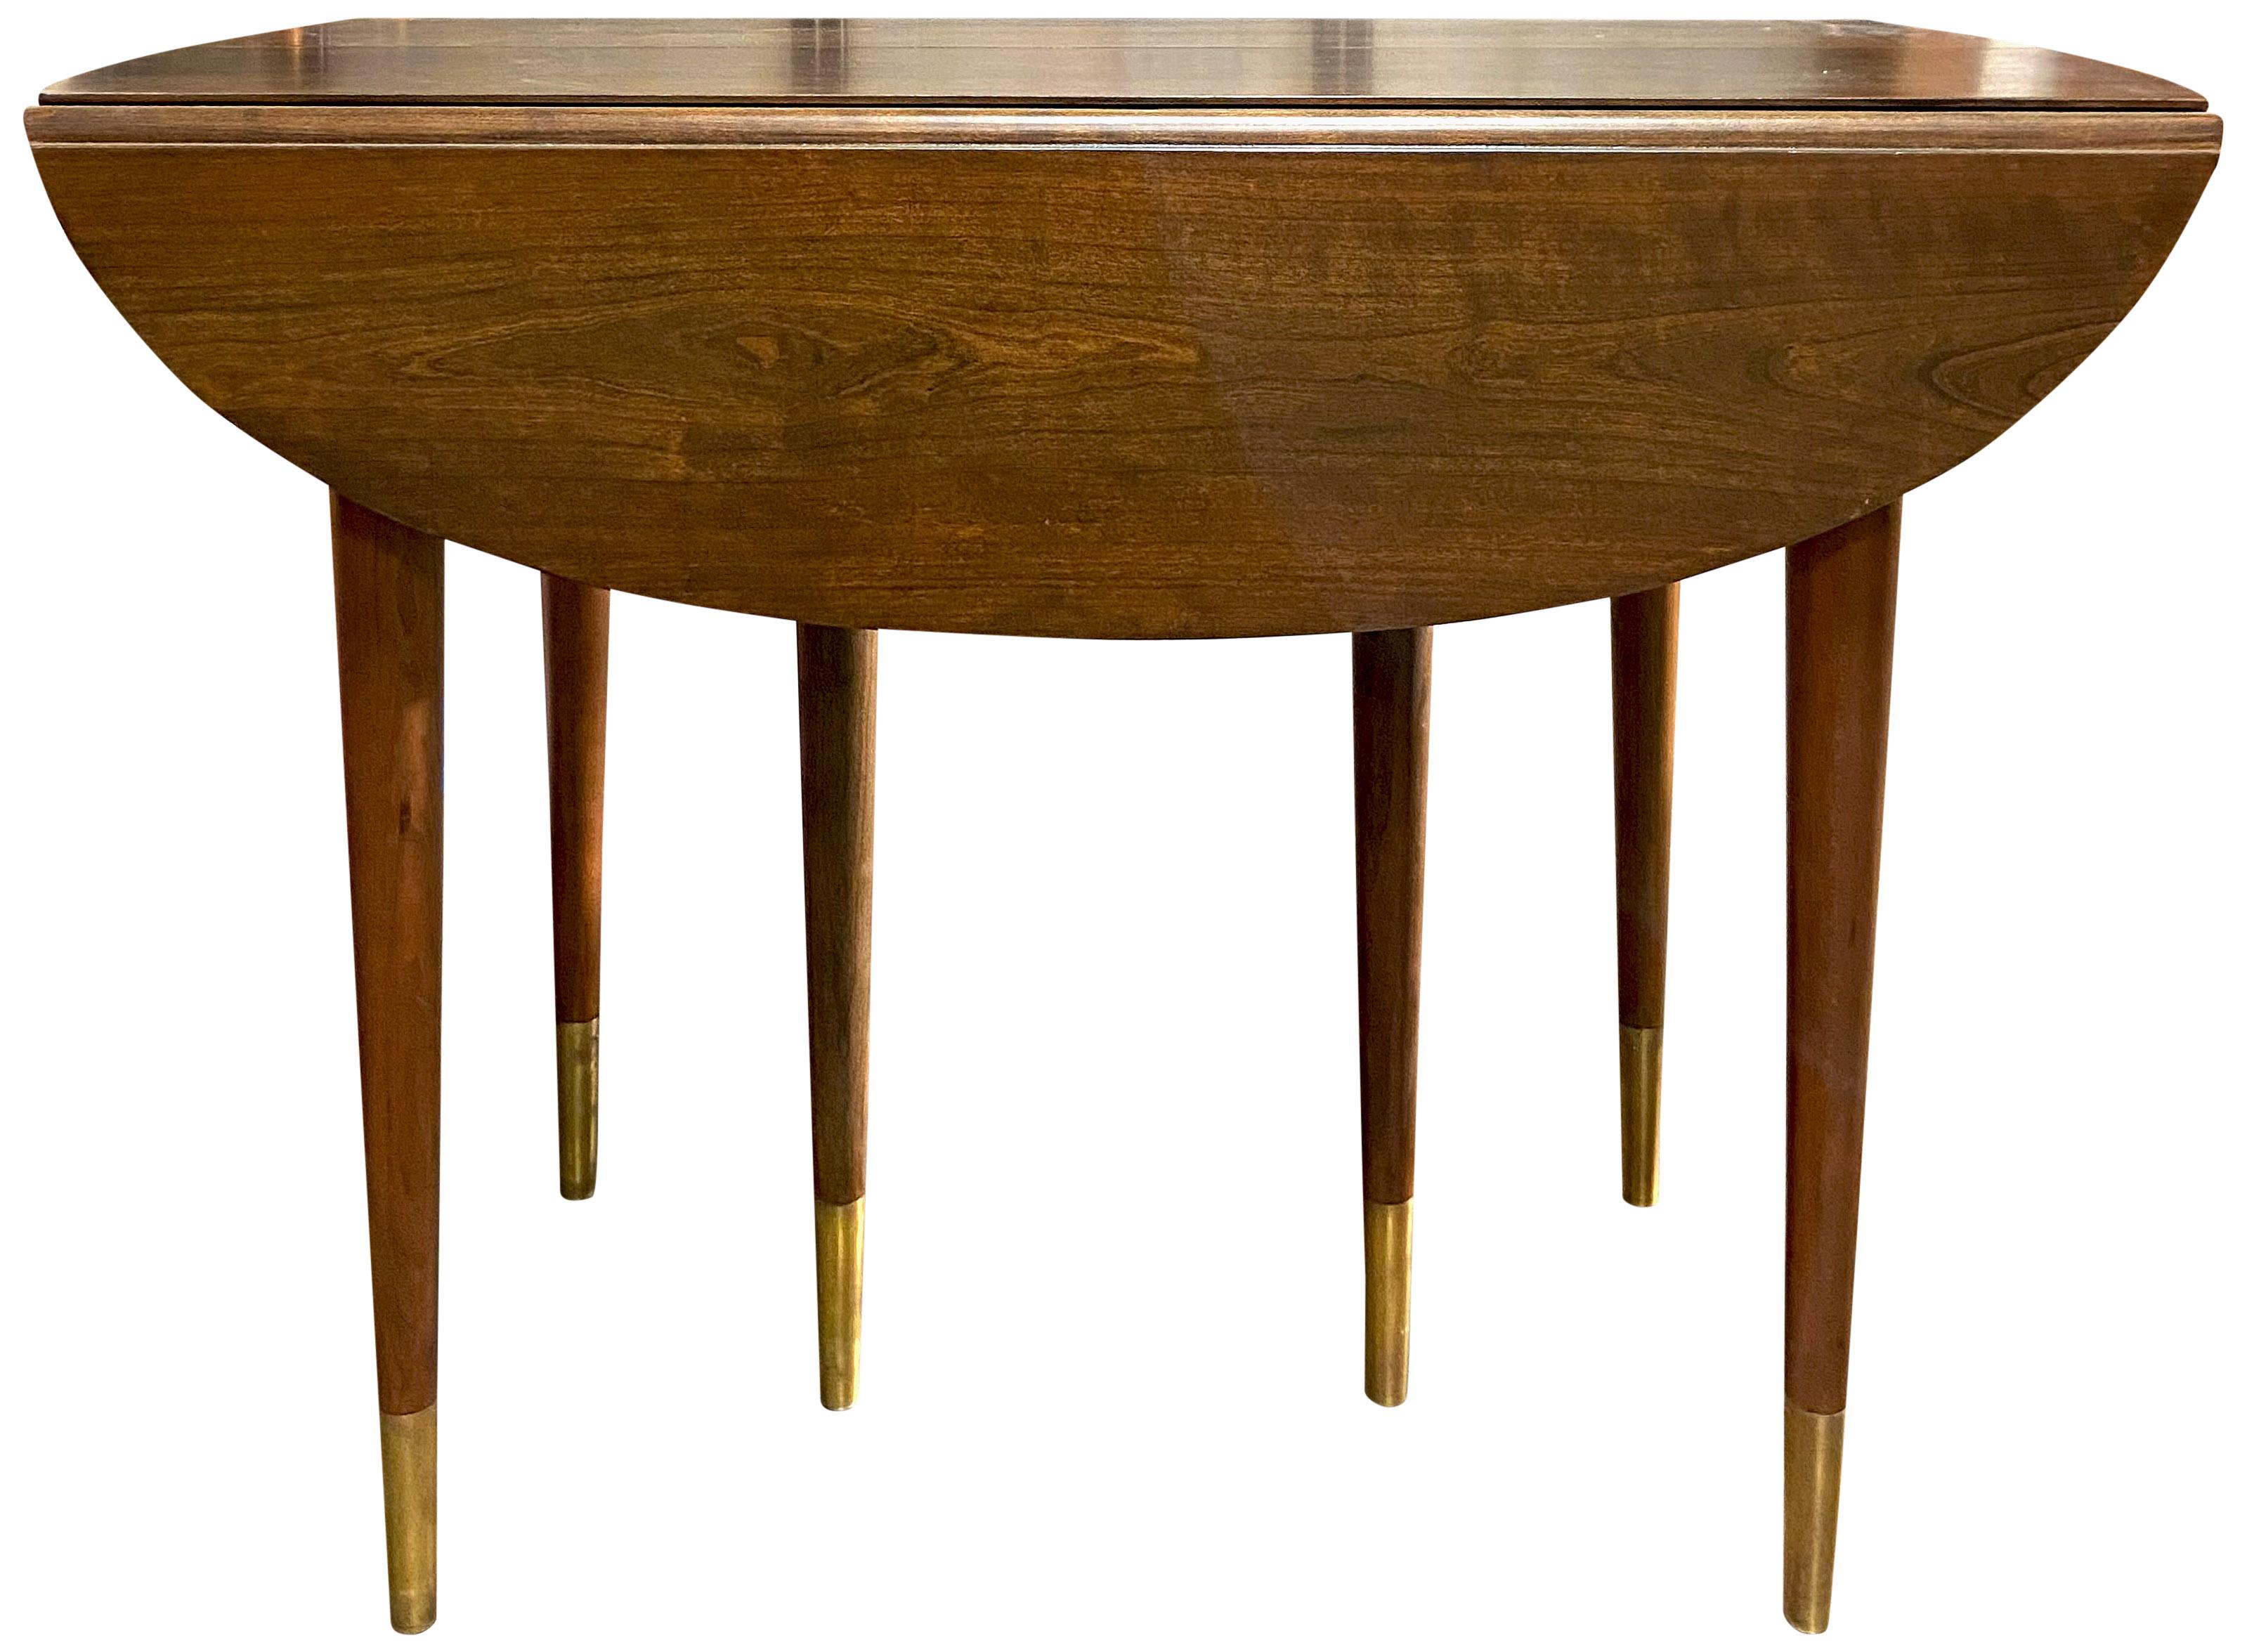 For your consideration is the spectacular dining table by John Widdicomb. Featuring a drop-leaf on either side that opens to reveal an oval shaped table. This table also offers four leaves that are 13 inches wide. The table will fully extend to an